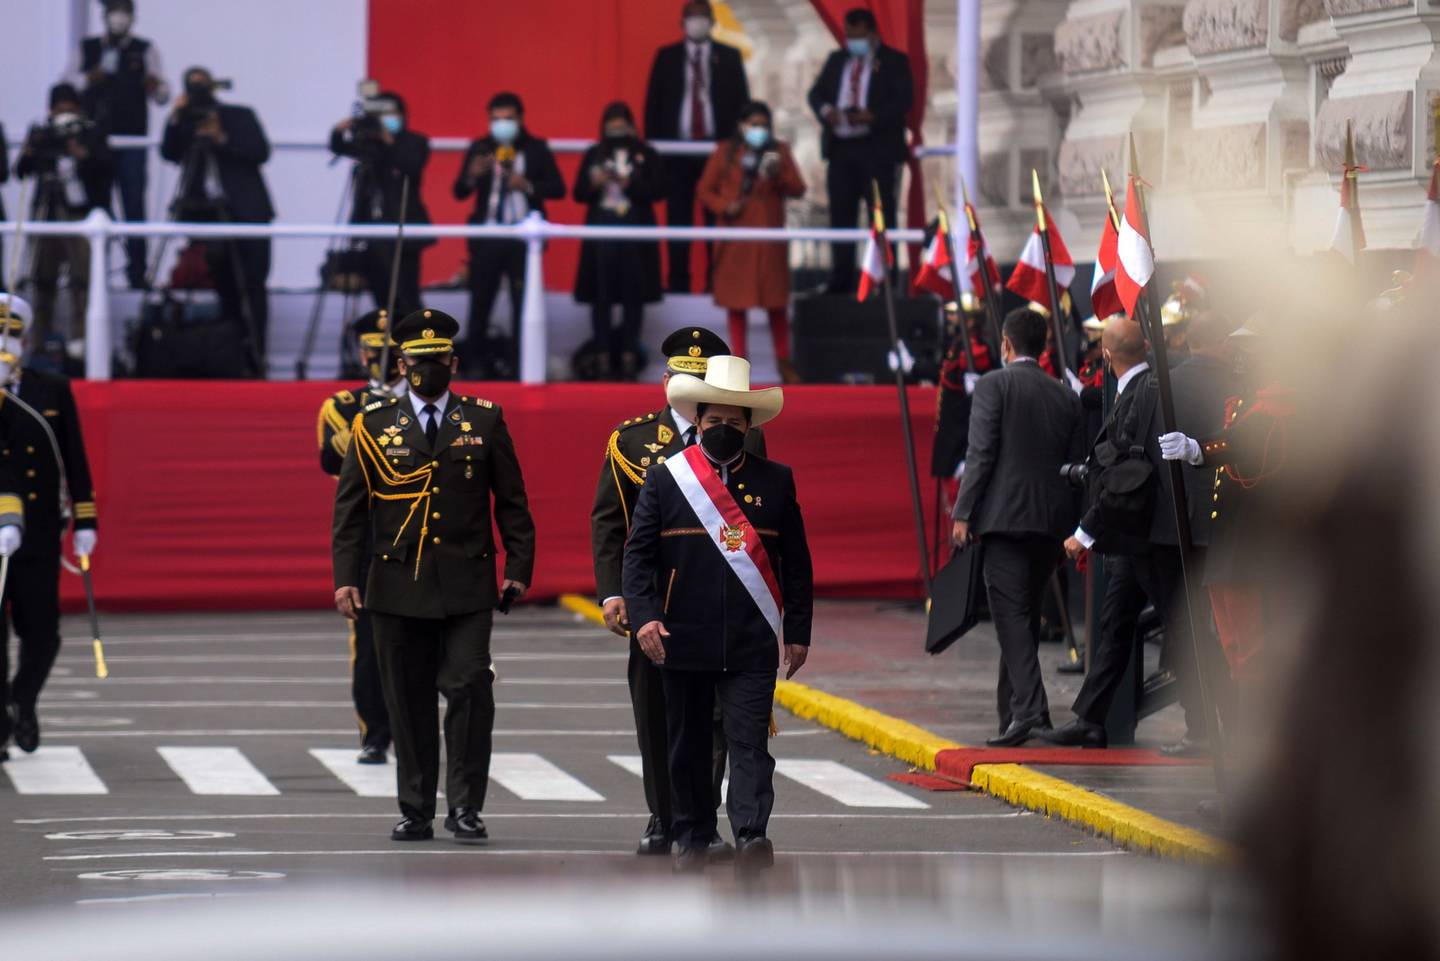 Pedro Castillo, Peru's president, departs from an inauguration ceremony at the Congress of the Republic of Peru in Lima, Peru, on Wednesday, July 28, 2021. Peru's dollar bonds due 2050 dropped after President Pedro Castillo said he would call for a constitutional referendum during his inaugural speech. Photographer: Miguel Yovera/Bloombergdfd